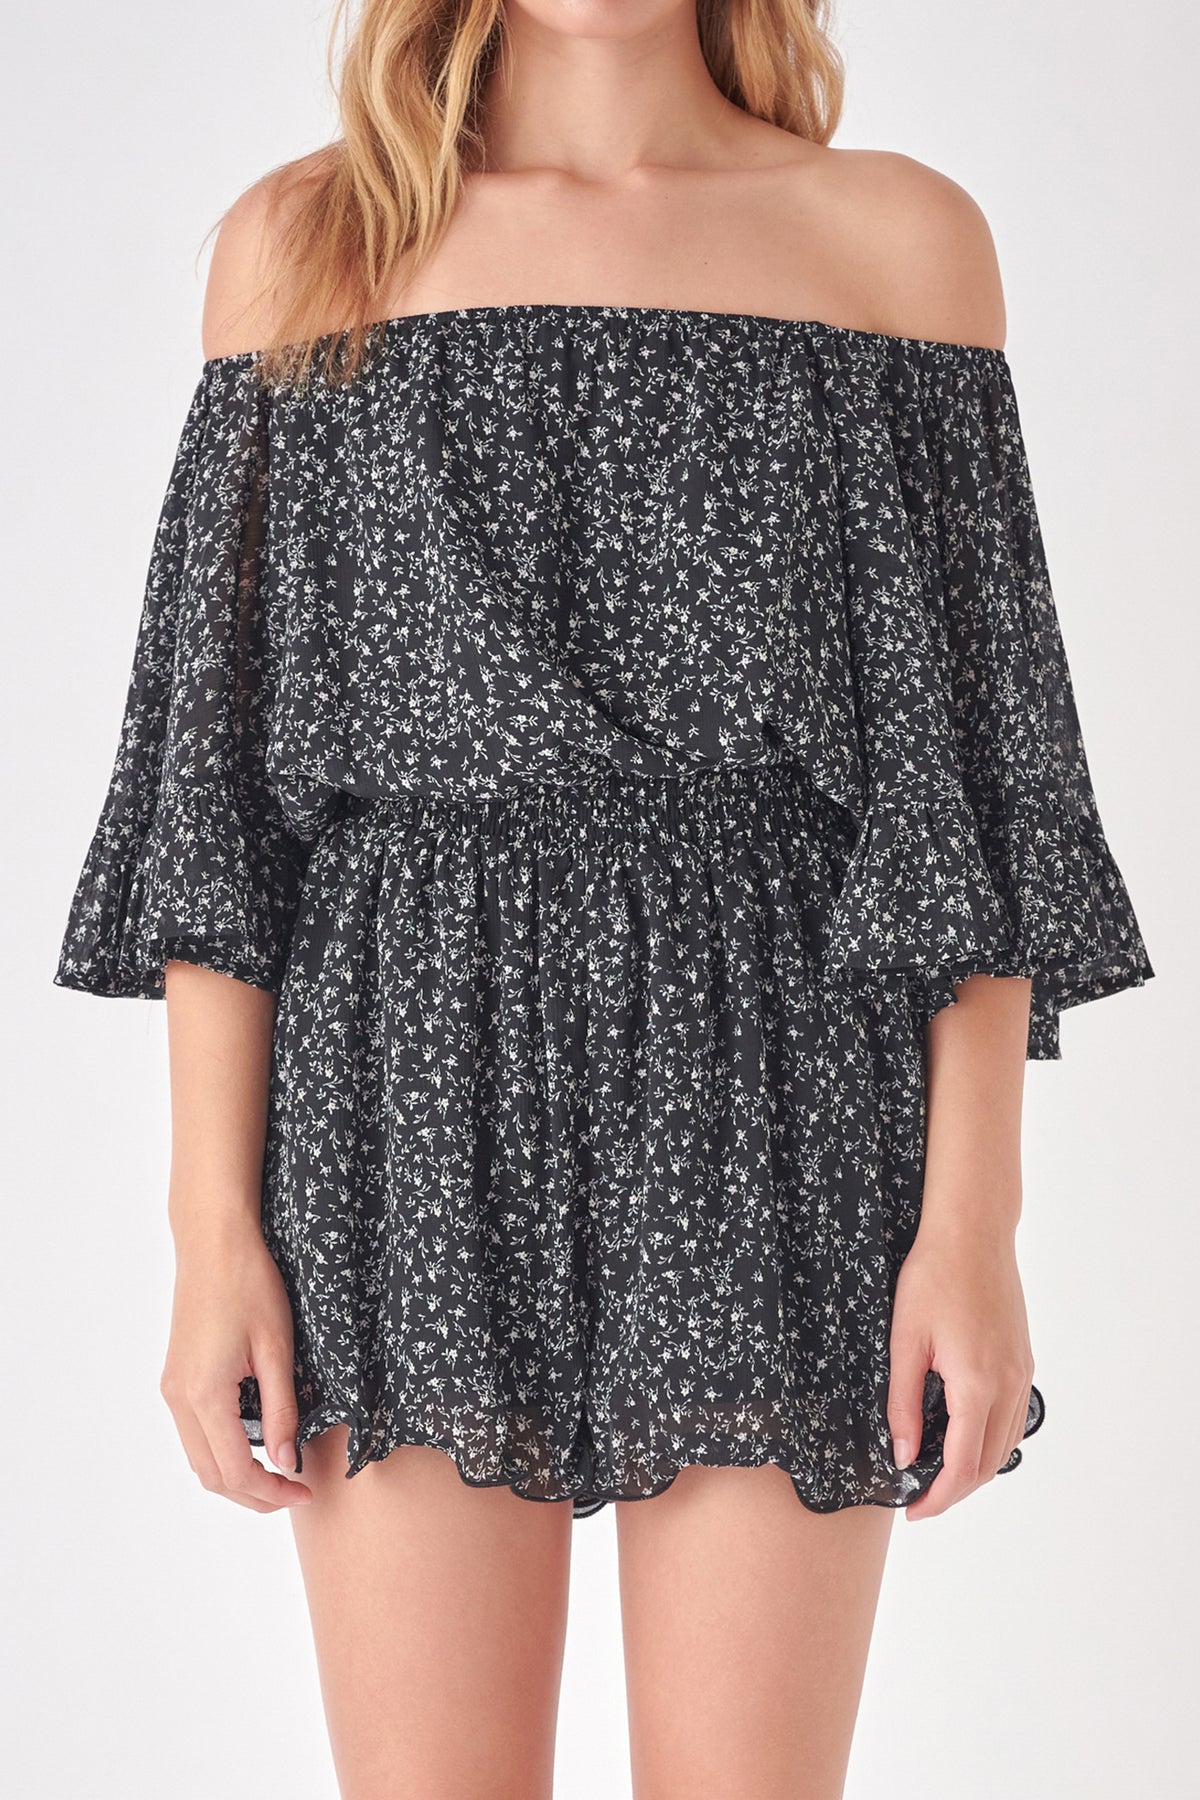 FREE THE ROSES - Flowy Ditsy Floral Romper - ROMPERS available at Objectrare